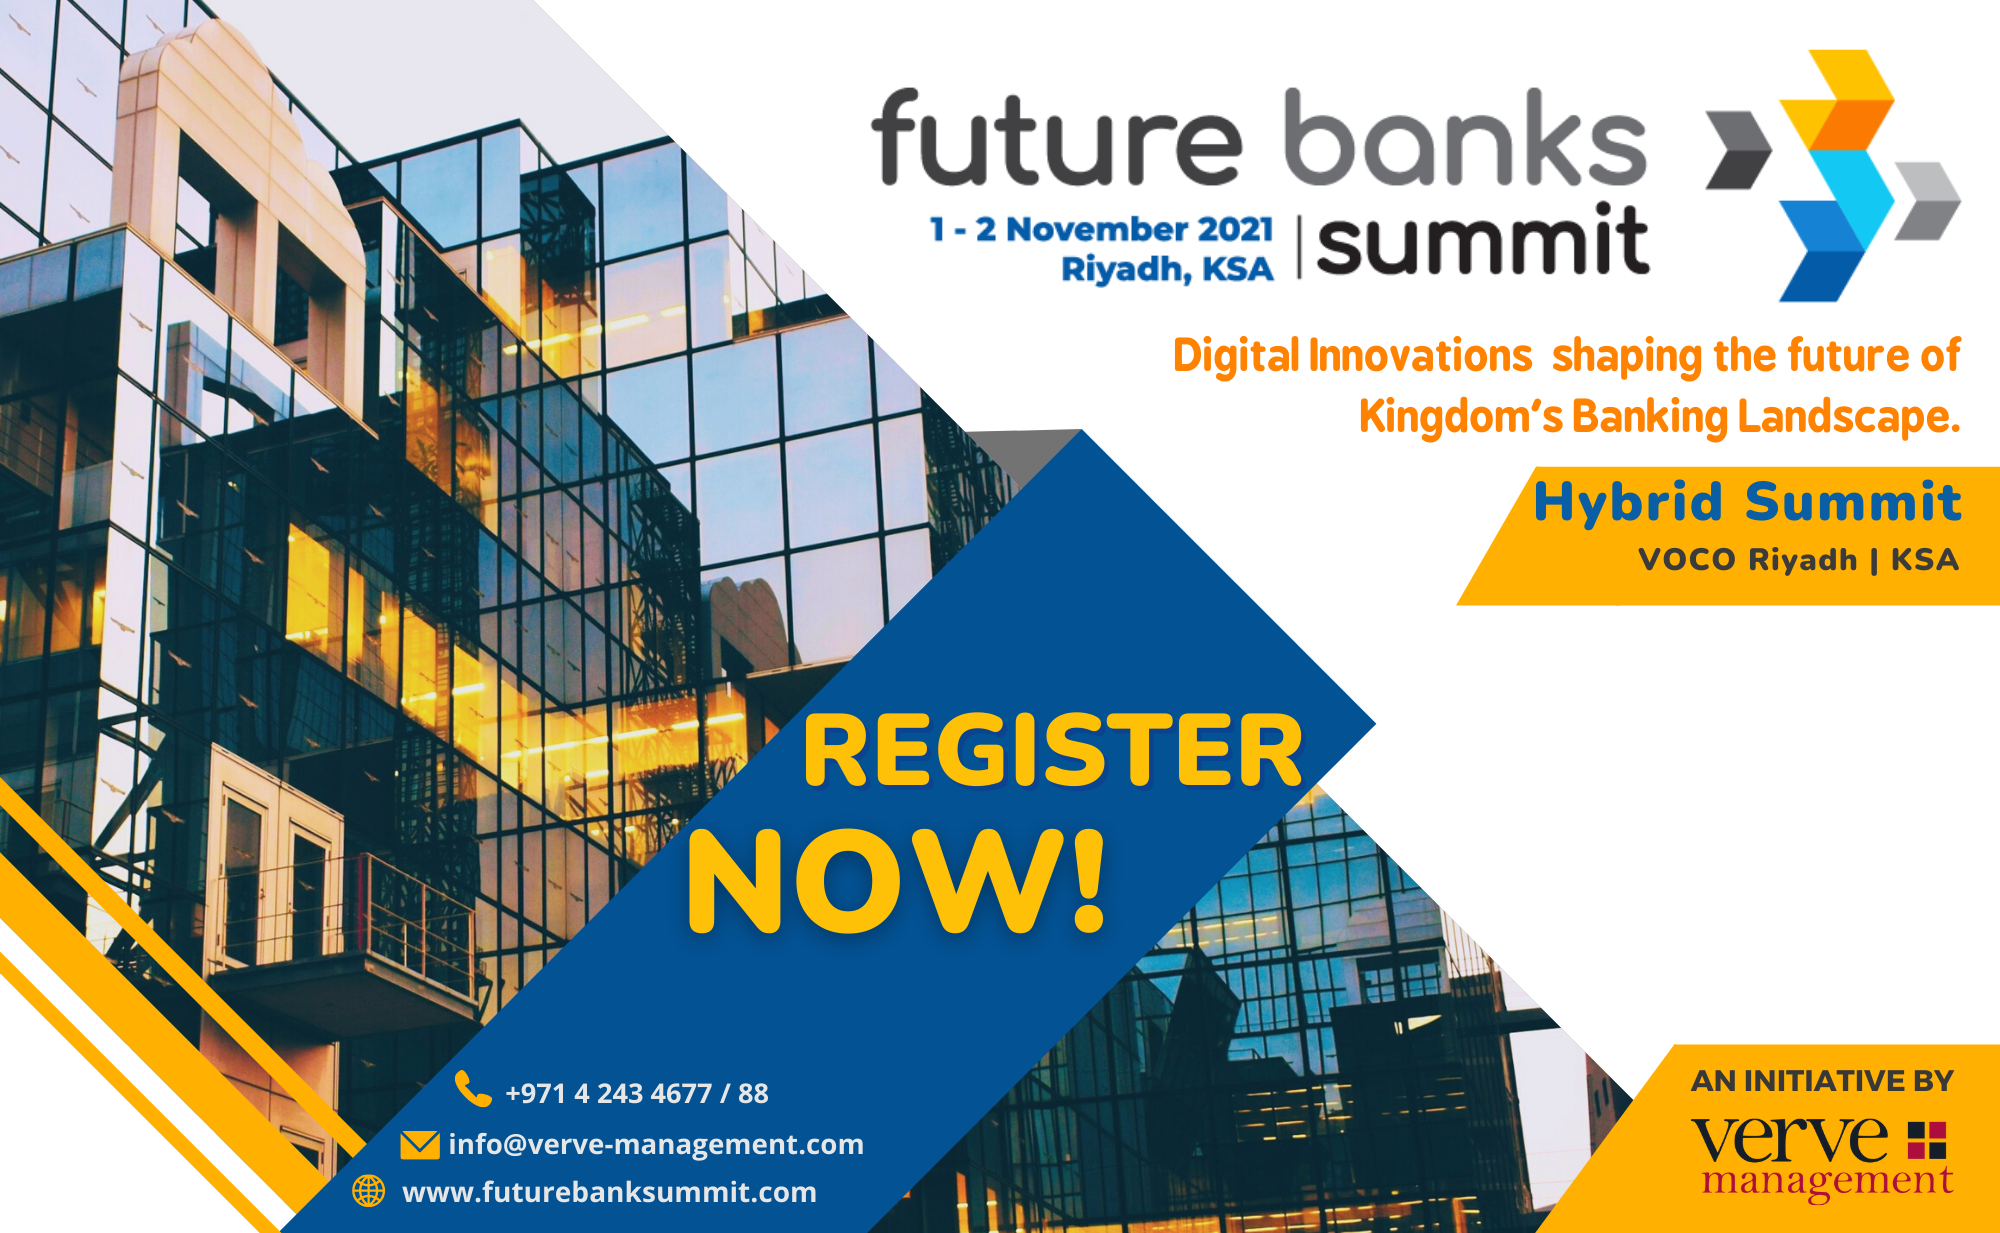 Digital Innovations Shaping the Future of Kingdom’s Banking Landscape